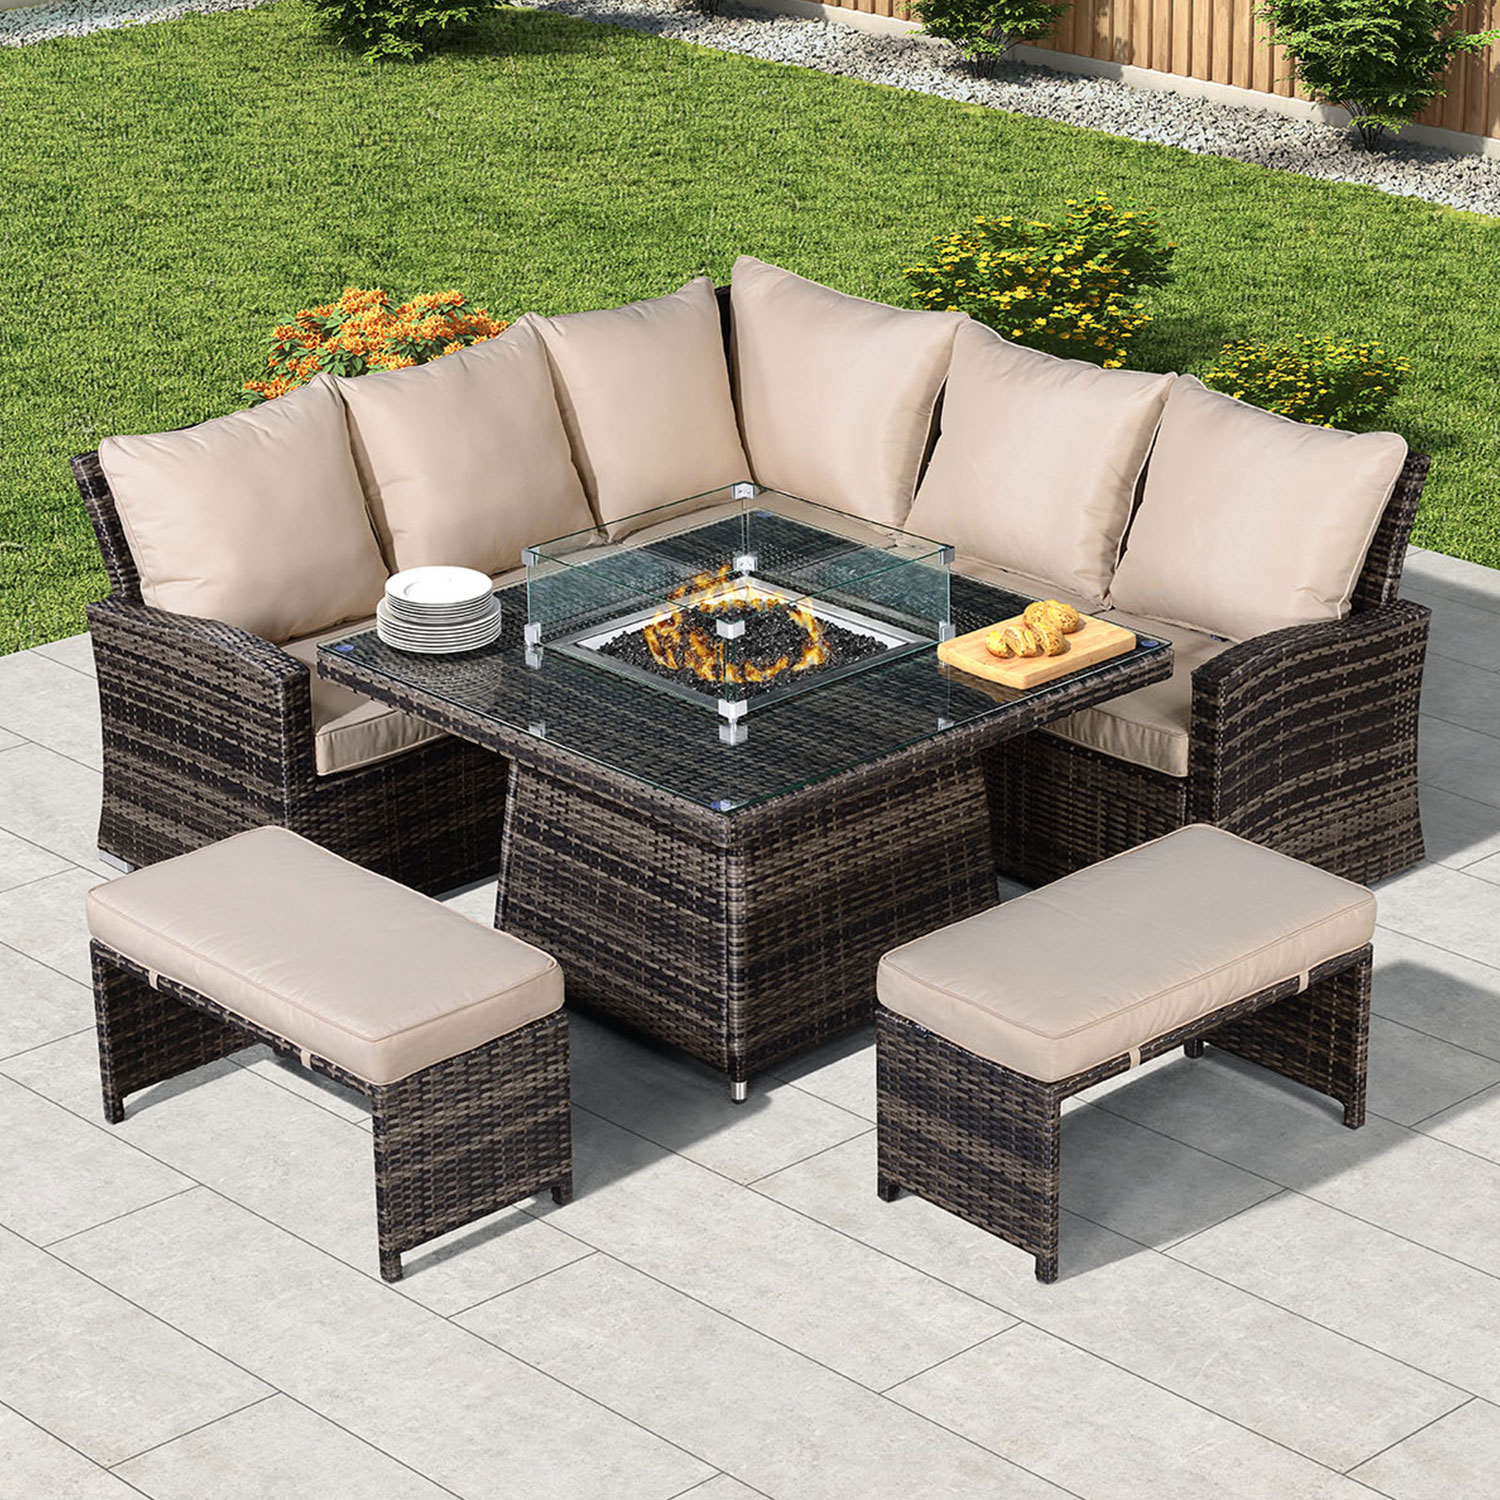 Nova Compact Cambridge Fireglow, Outdoor Garden Furniture With Gas Fire Pit Philippines